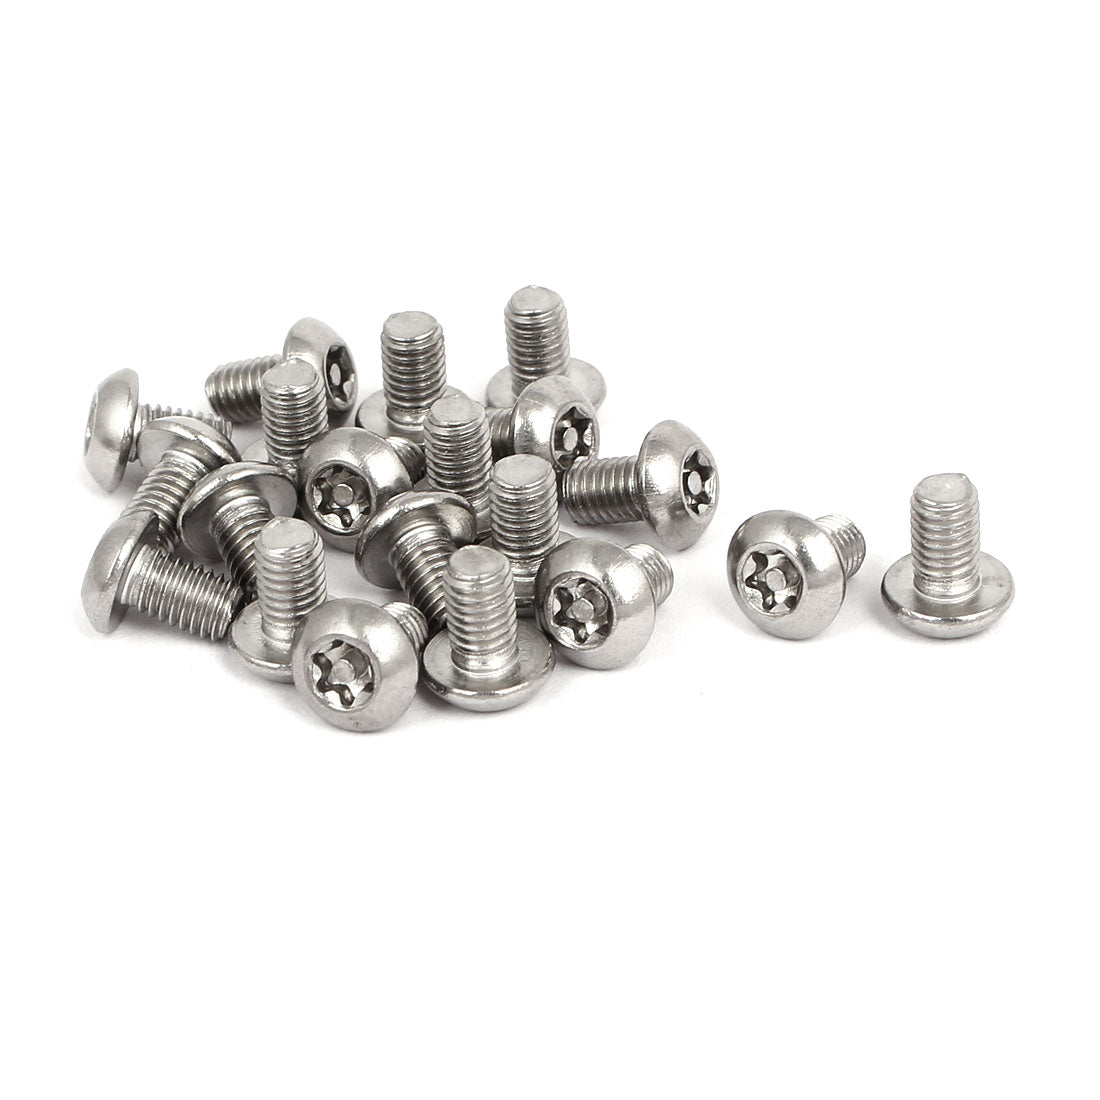 uxcell Uxcell M5x8mm 304 Stainless Steel Button Head Torx Security Tamper Proof Screws 20pcs